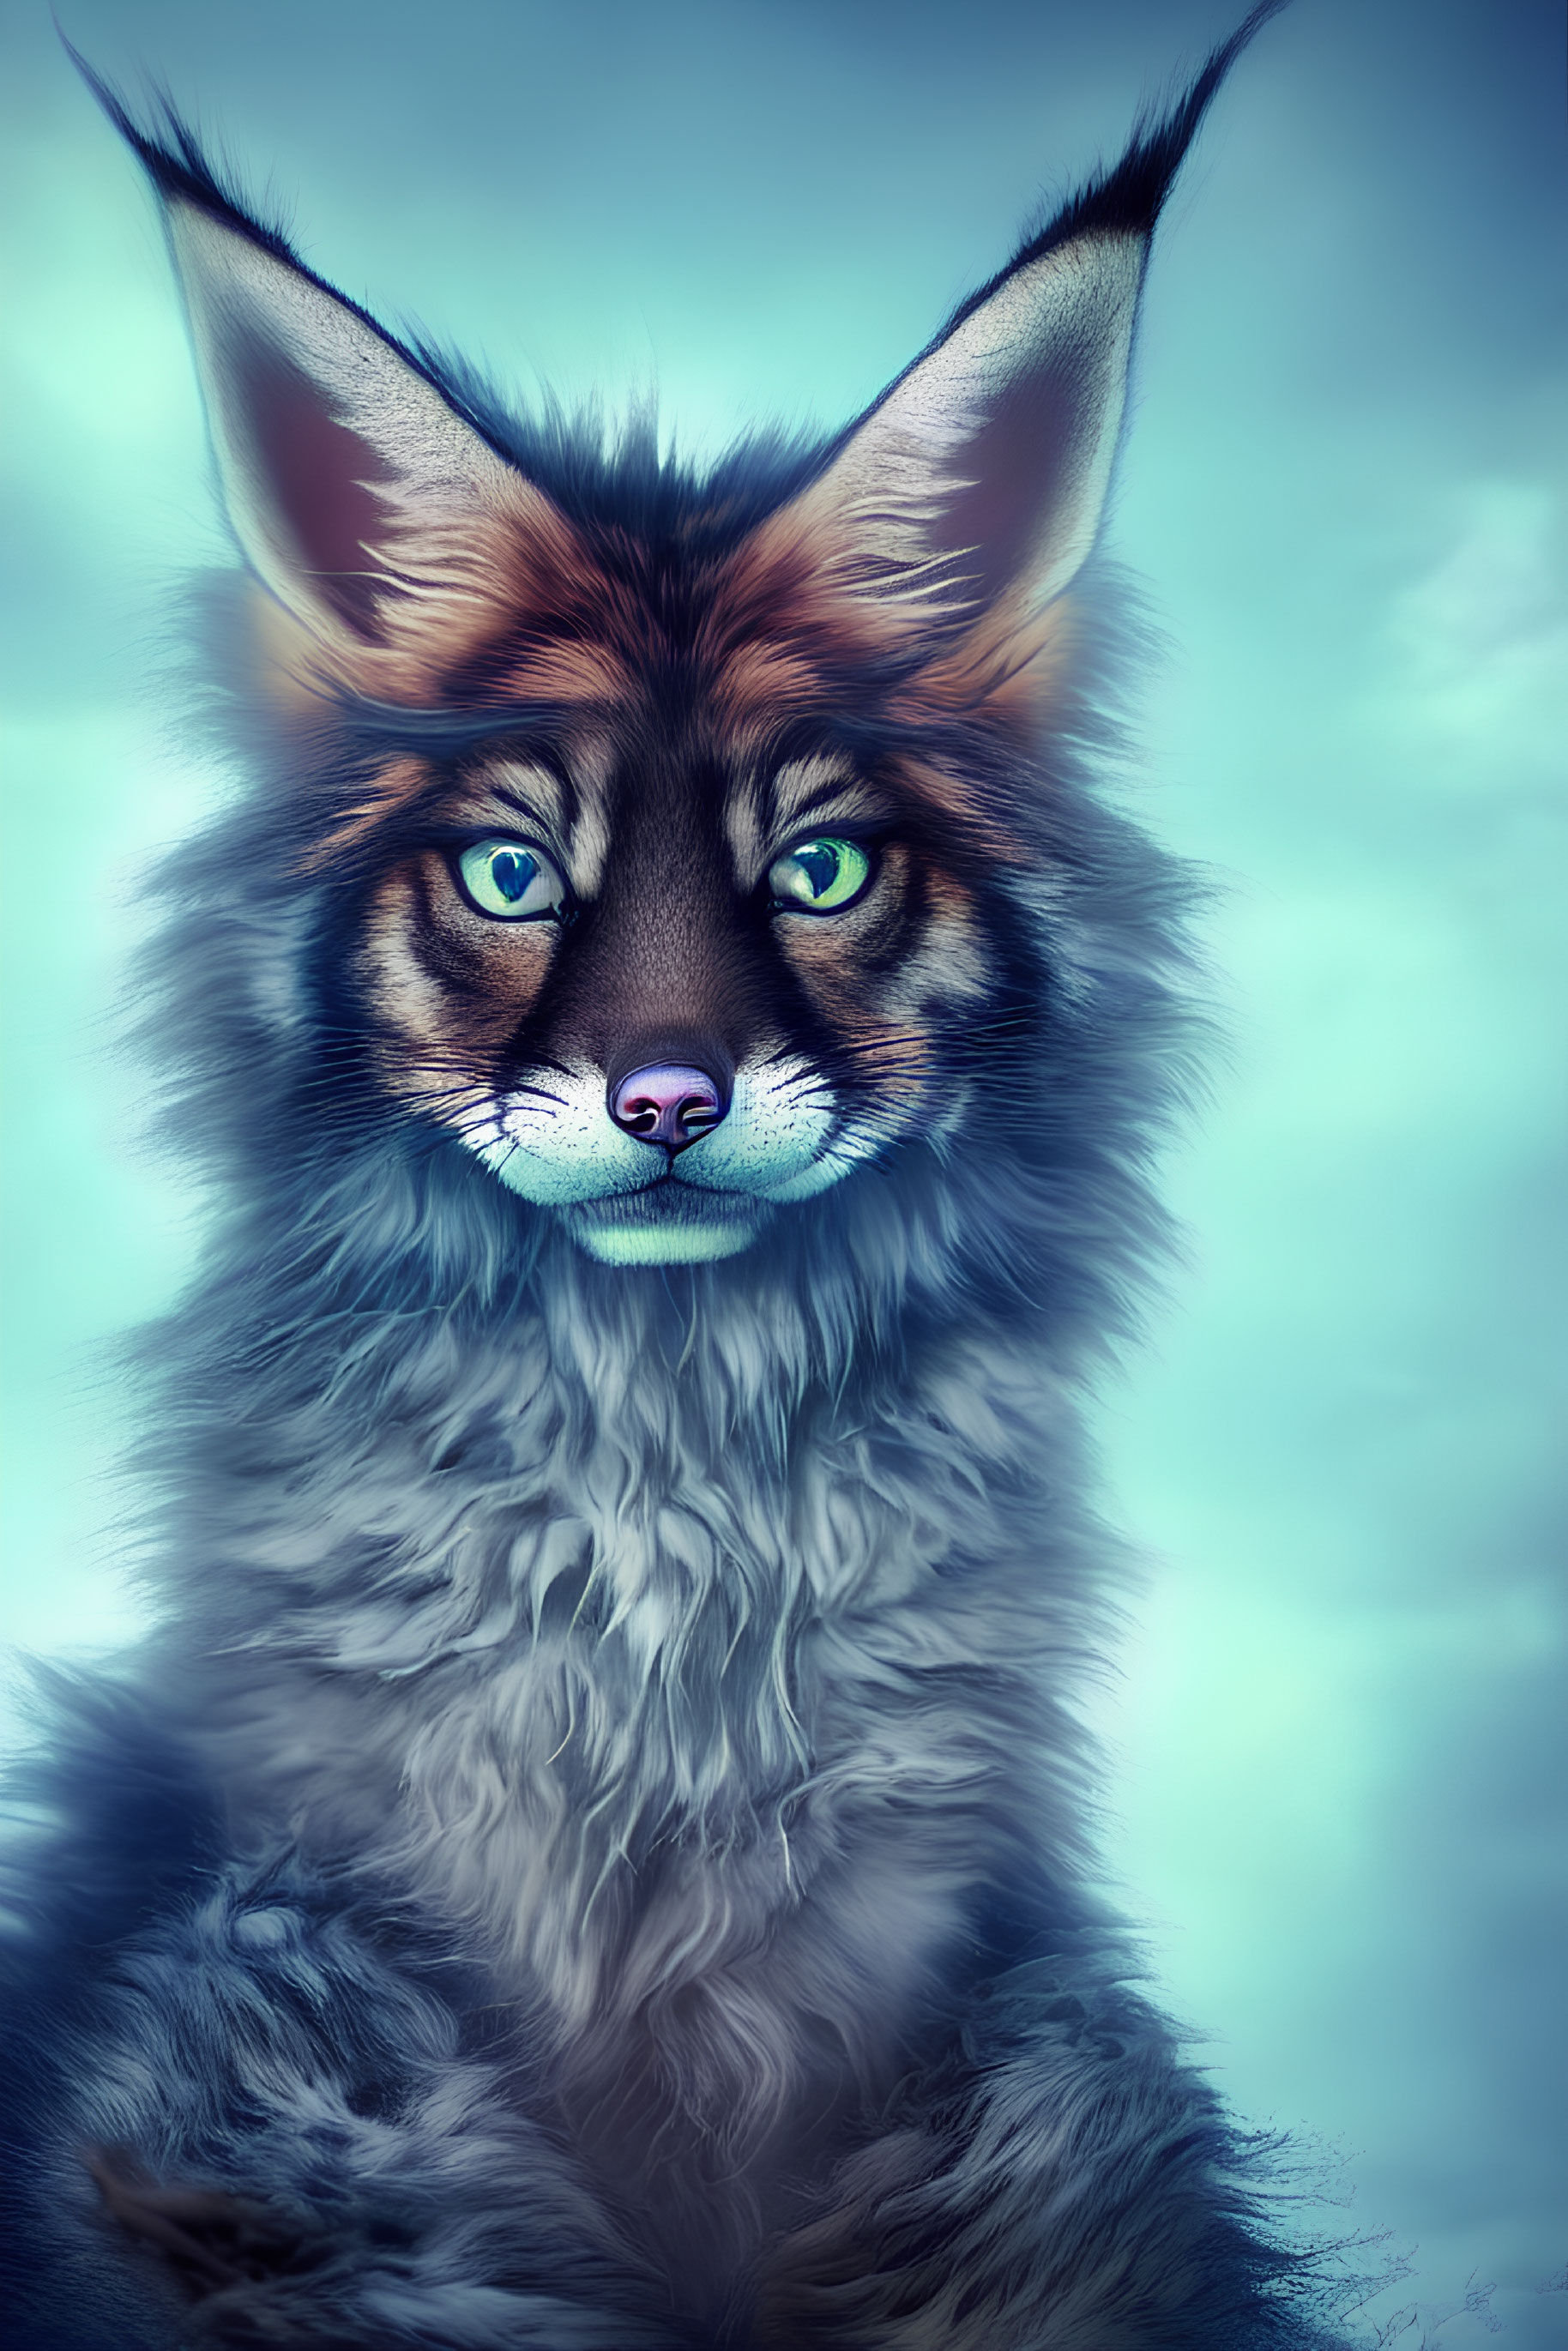 Detailed anthropomorphic fox character with green eyes on teal background